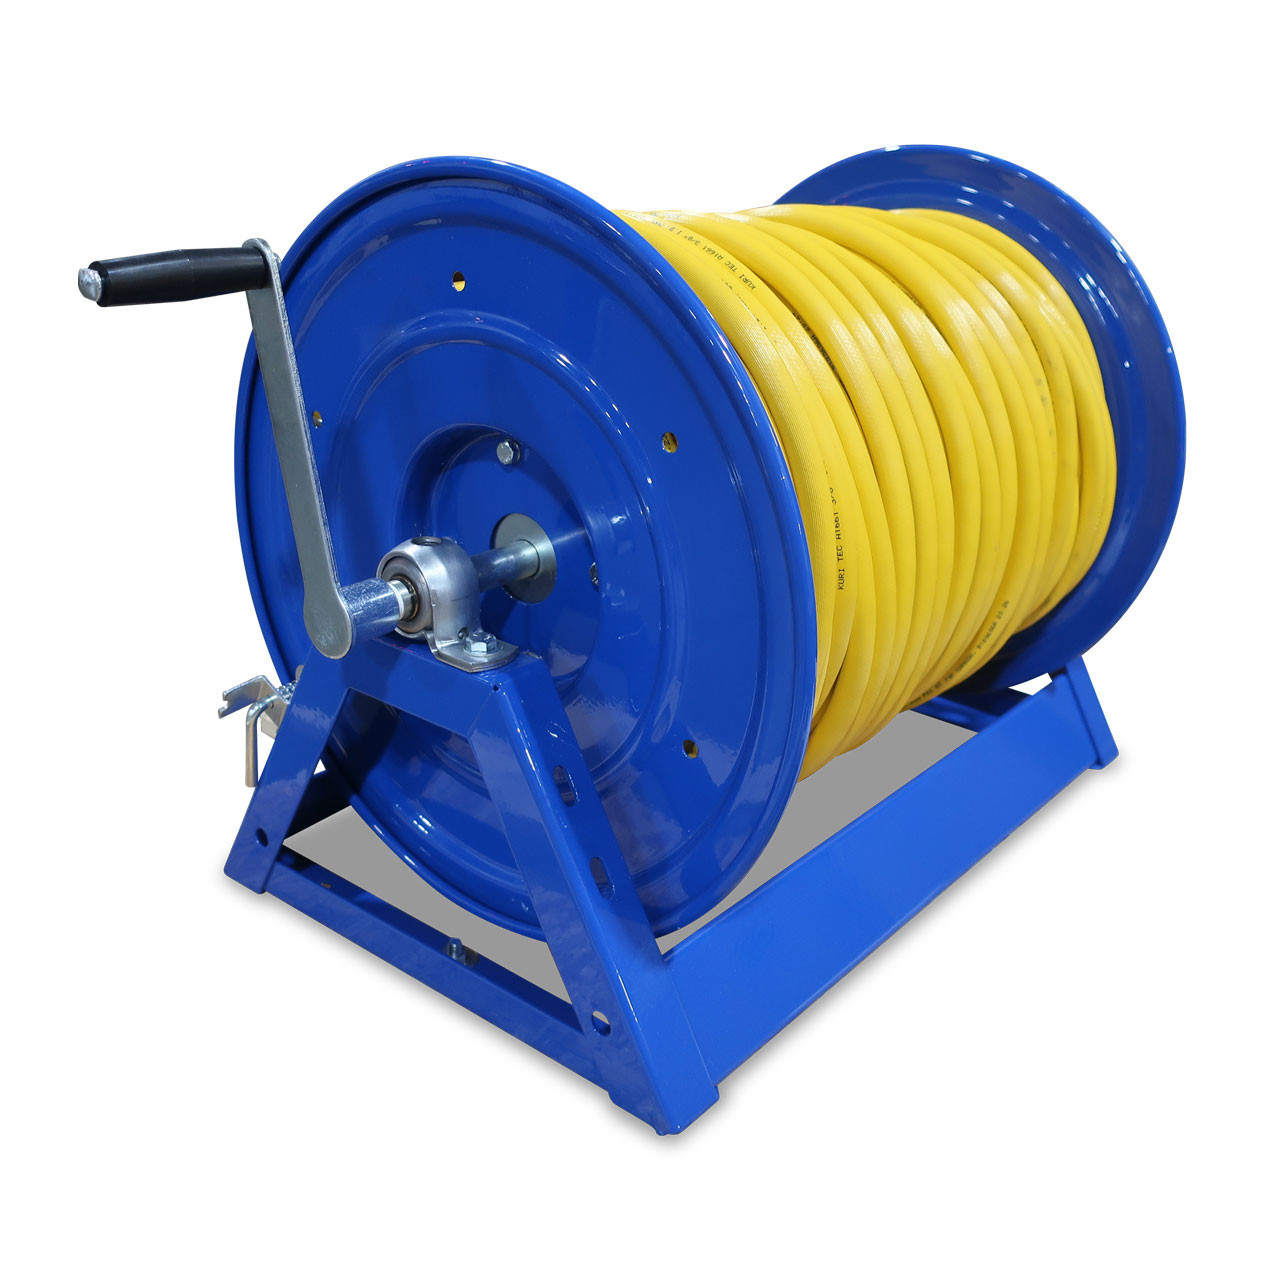 Coxreels Low Pressure Retractable Air/Water Reel 1/4 I.D. 50' with Hose  300 PSI 674255718333